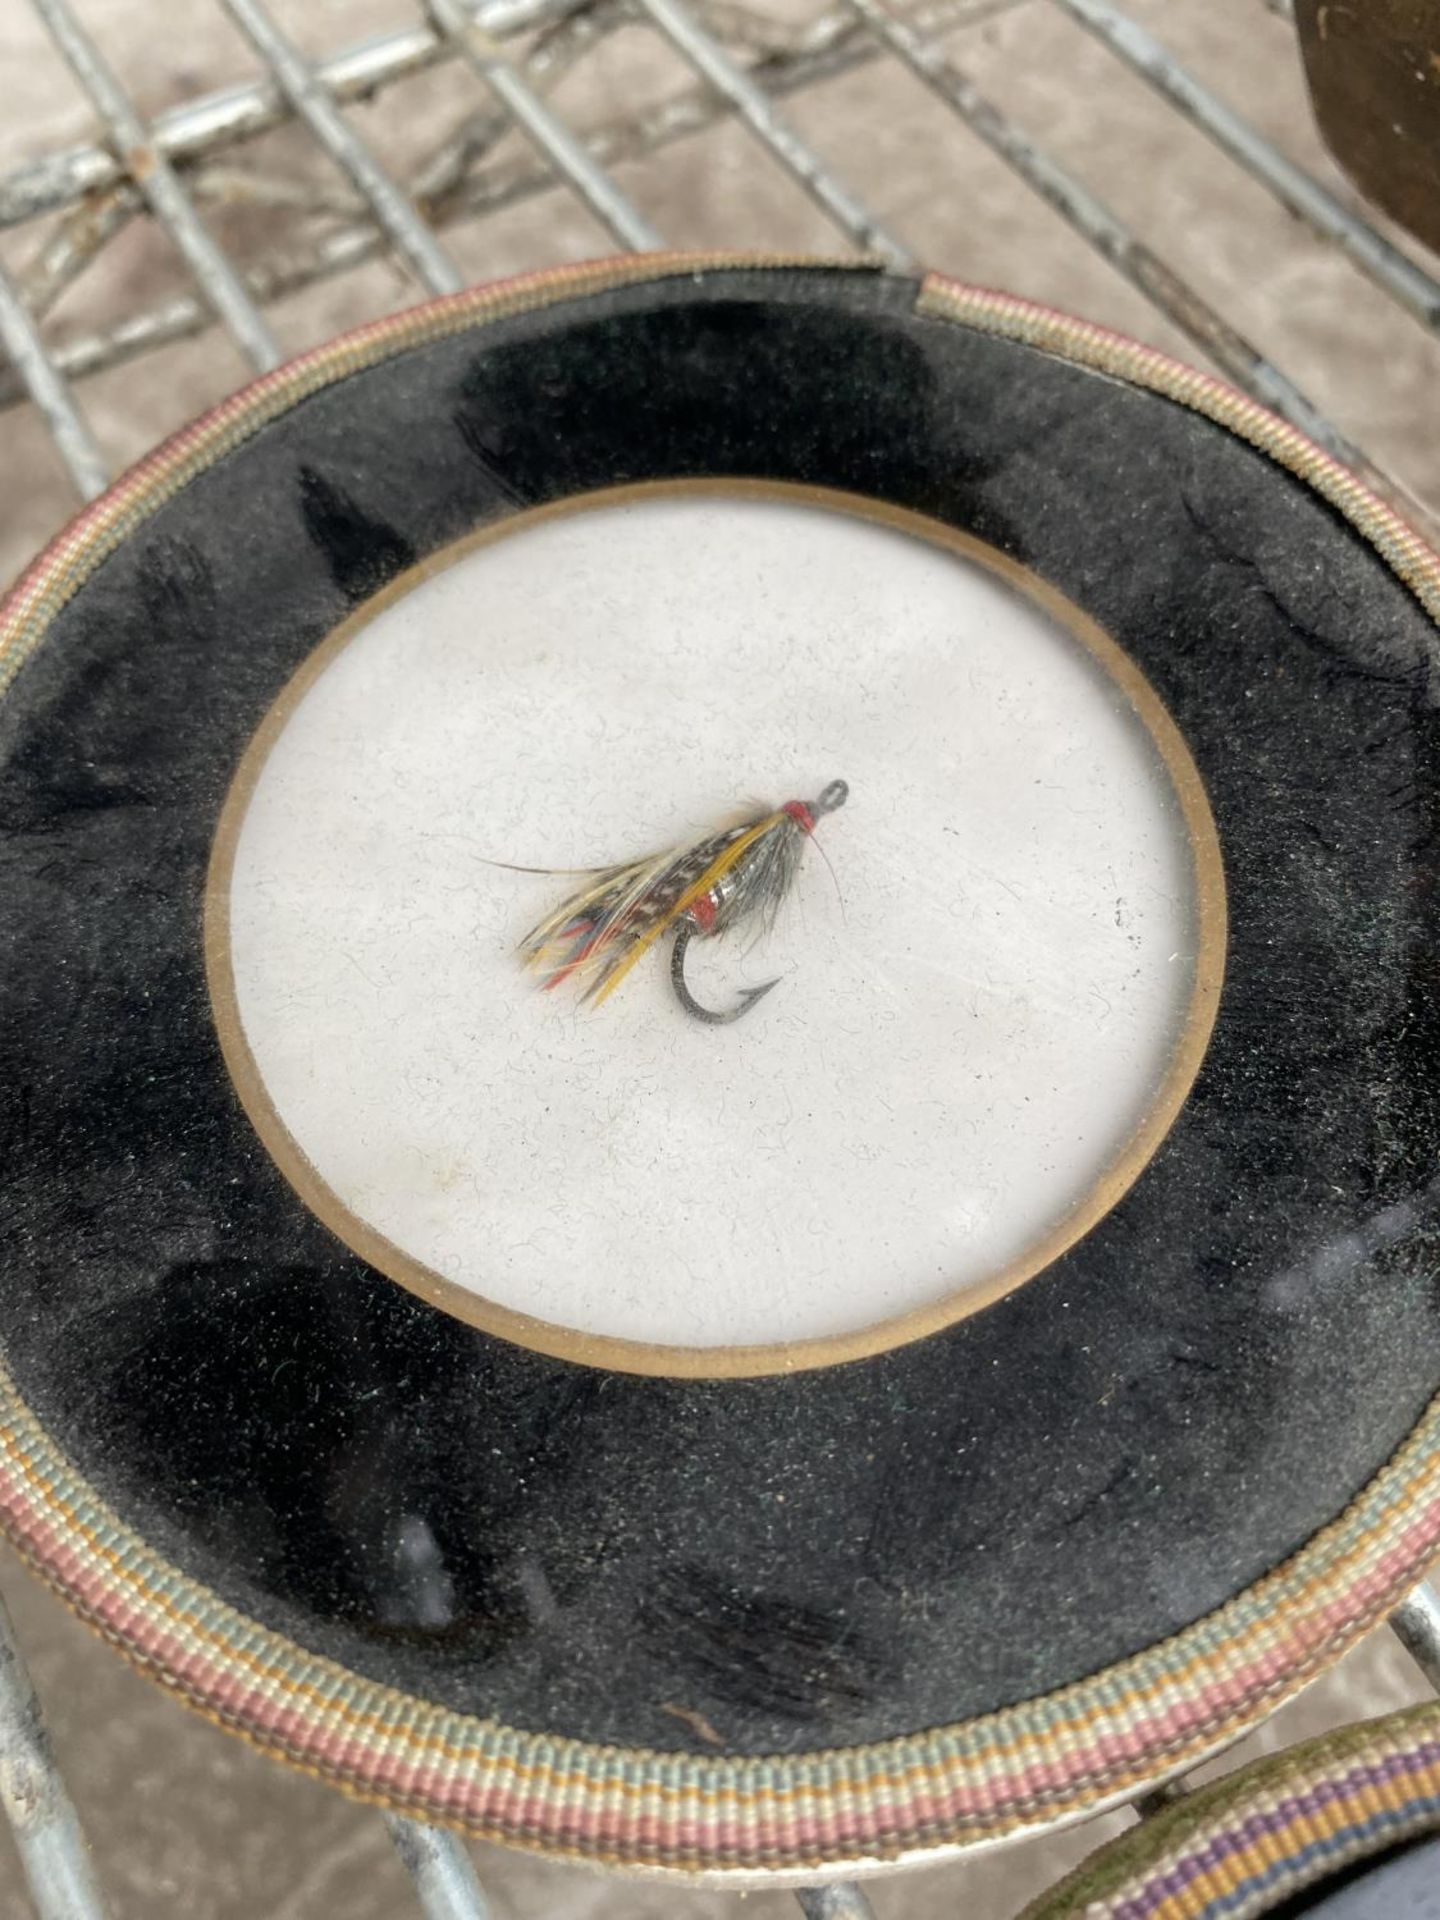 A COLLECTION OF GLASS COASTERS WITH FISHING FLIES INSIDE - Image 6 of 7